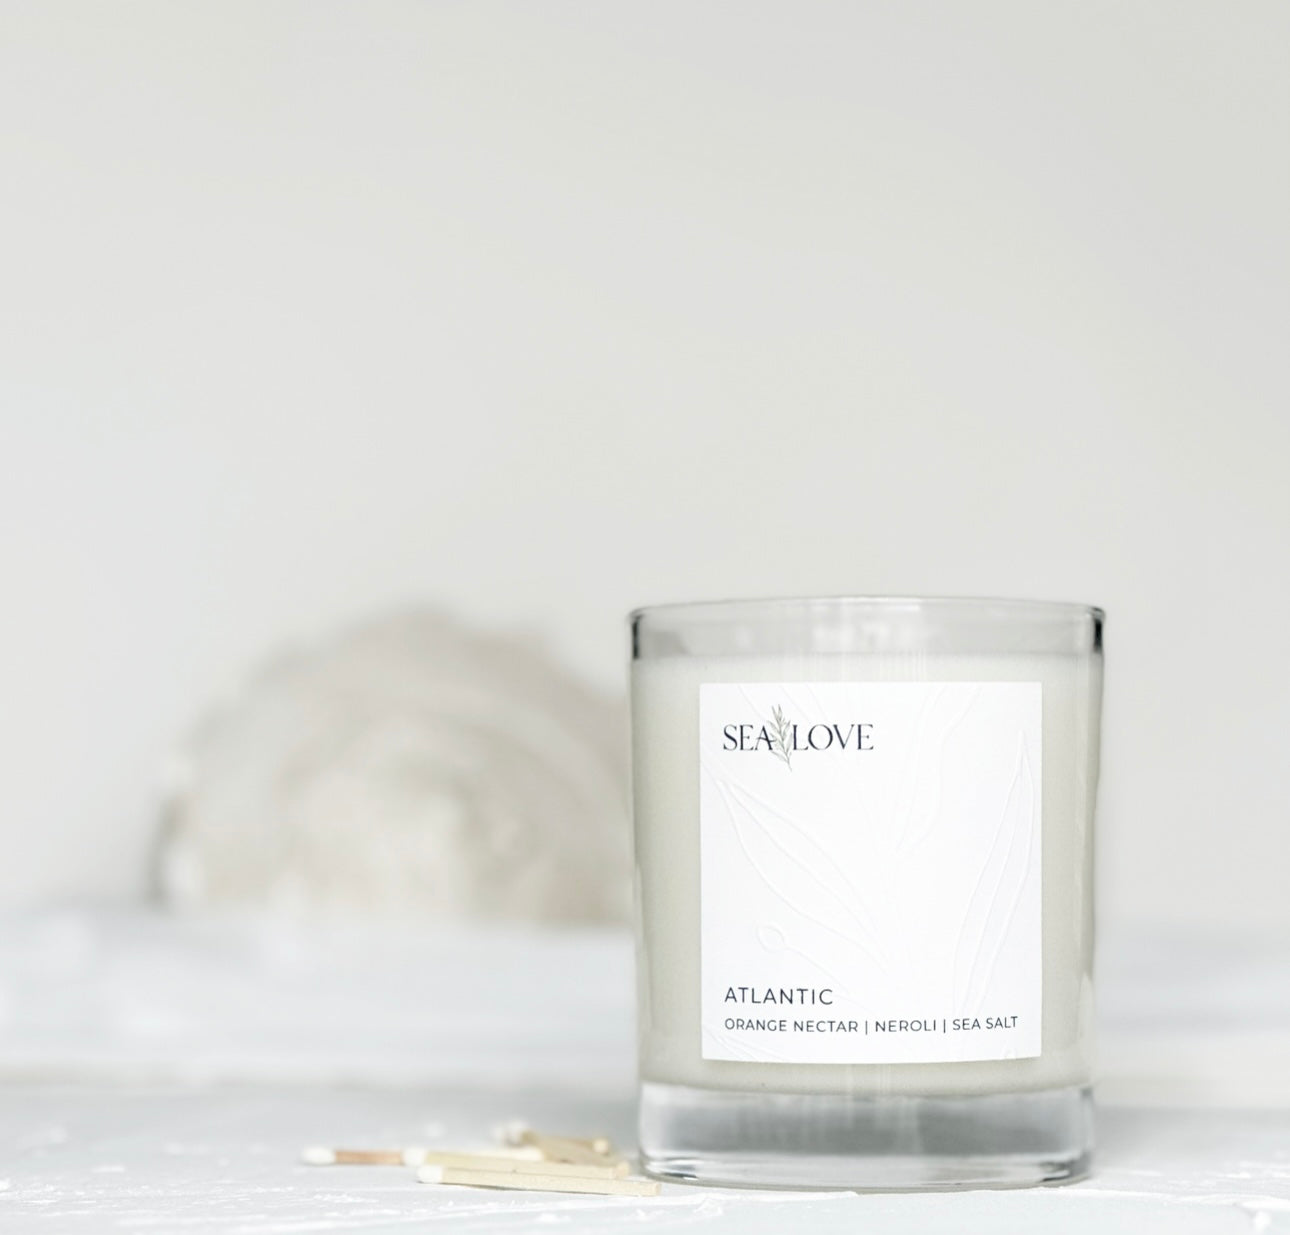 A scented candle in a clear glass jar with a label that reads "sea love, atlantic orange nectar neroli sea salt," placed on a neutral background with a white seashell and matches nearby.